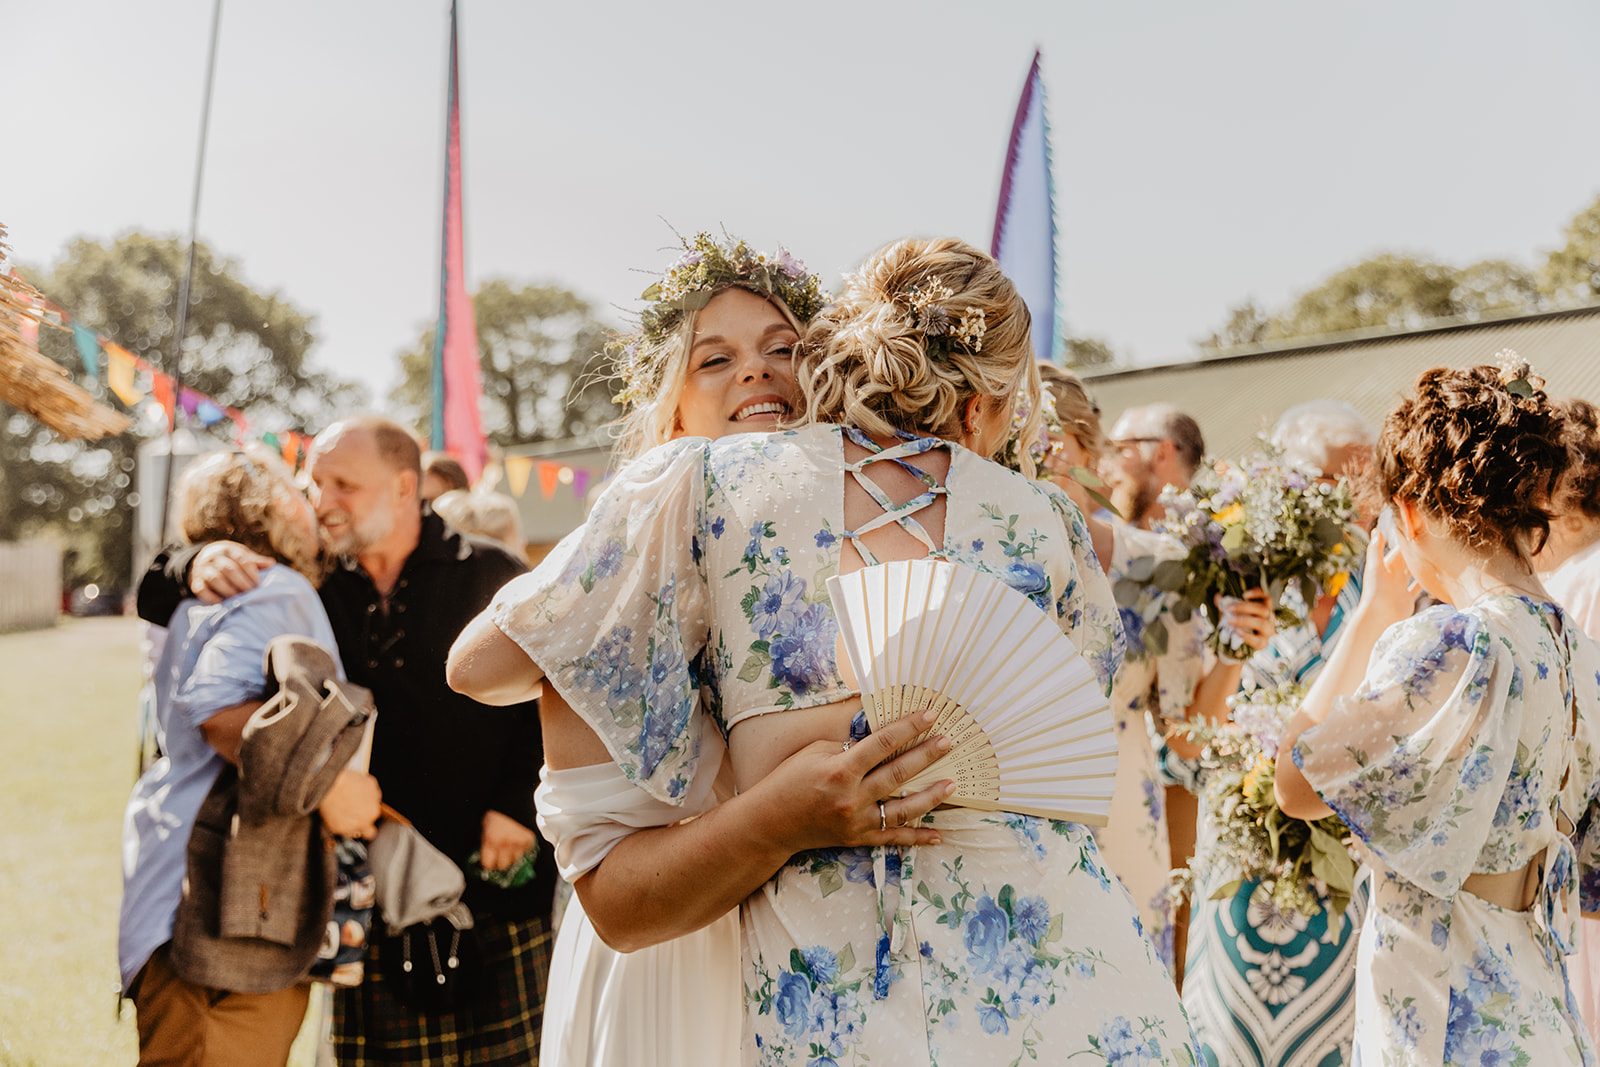 Bride and Groom procession at a wedding at Mac's Farm in Sussex. By OliveJoy Photography.